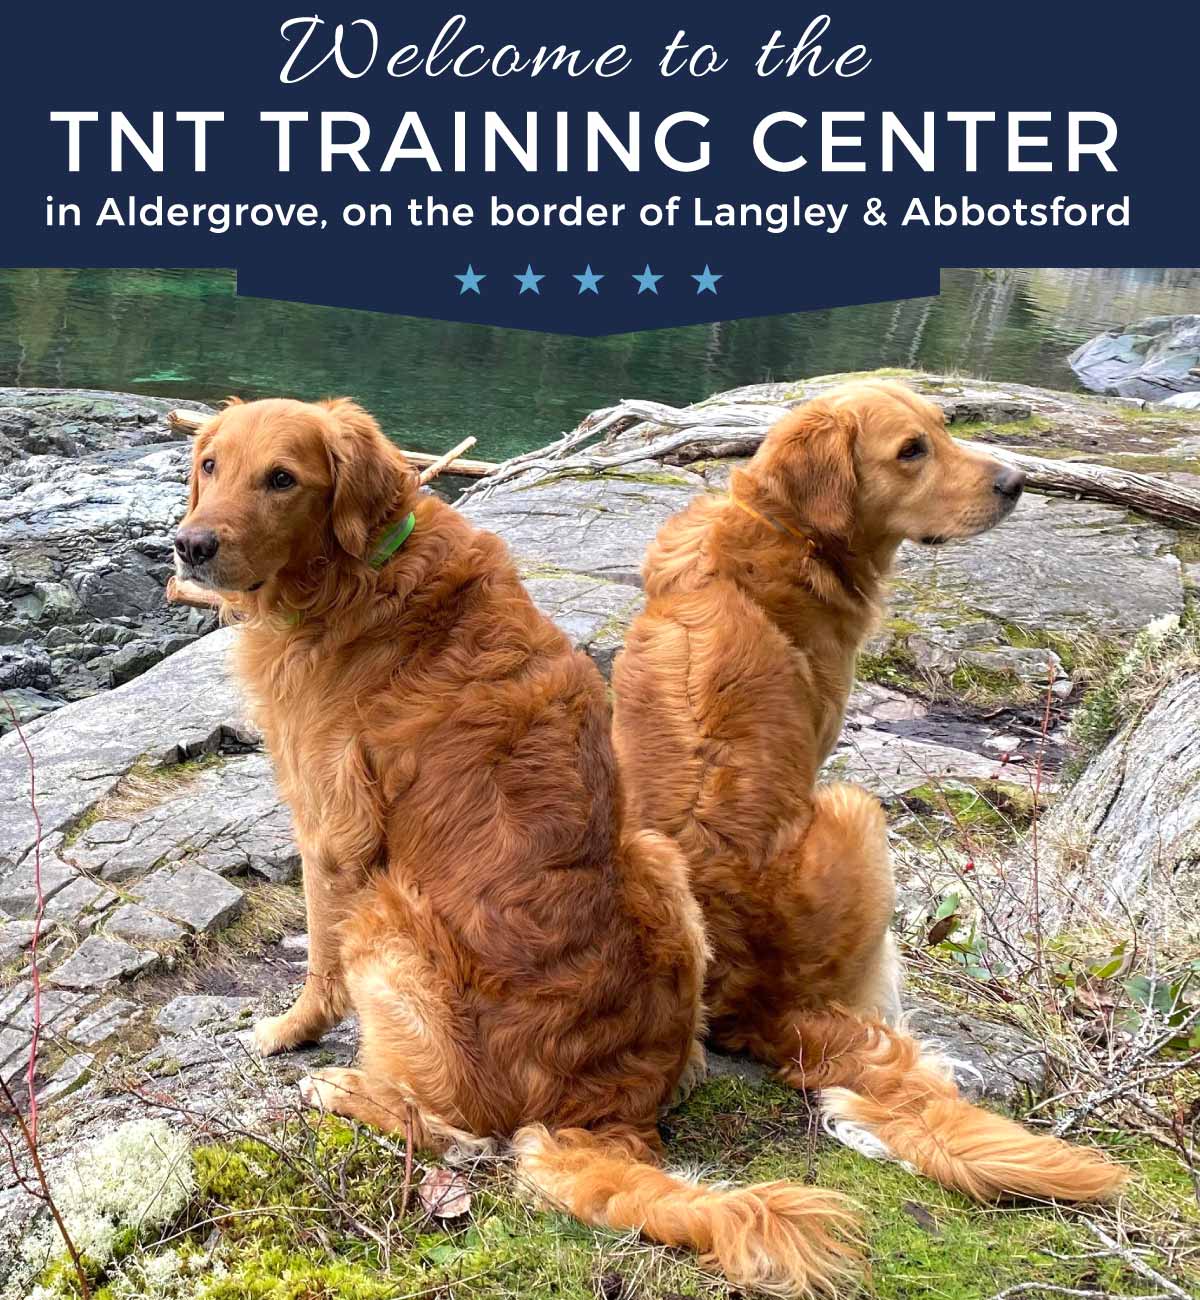 welcome to the TNT training center